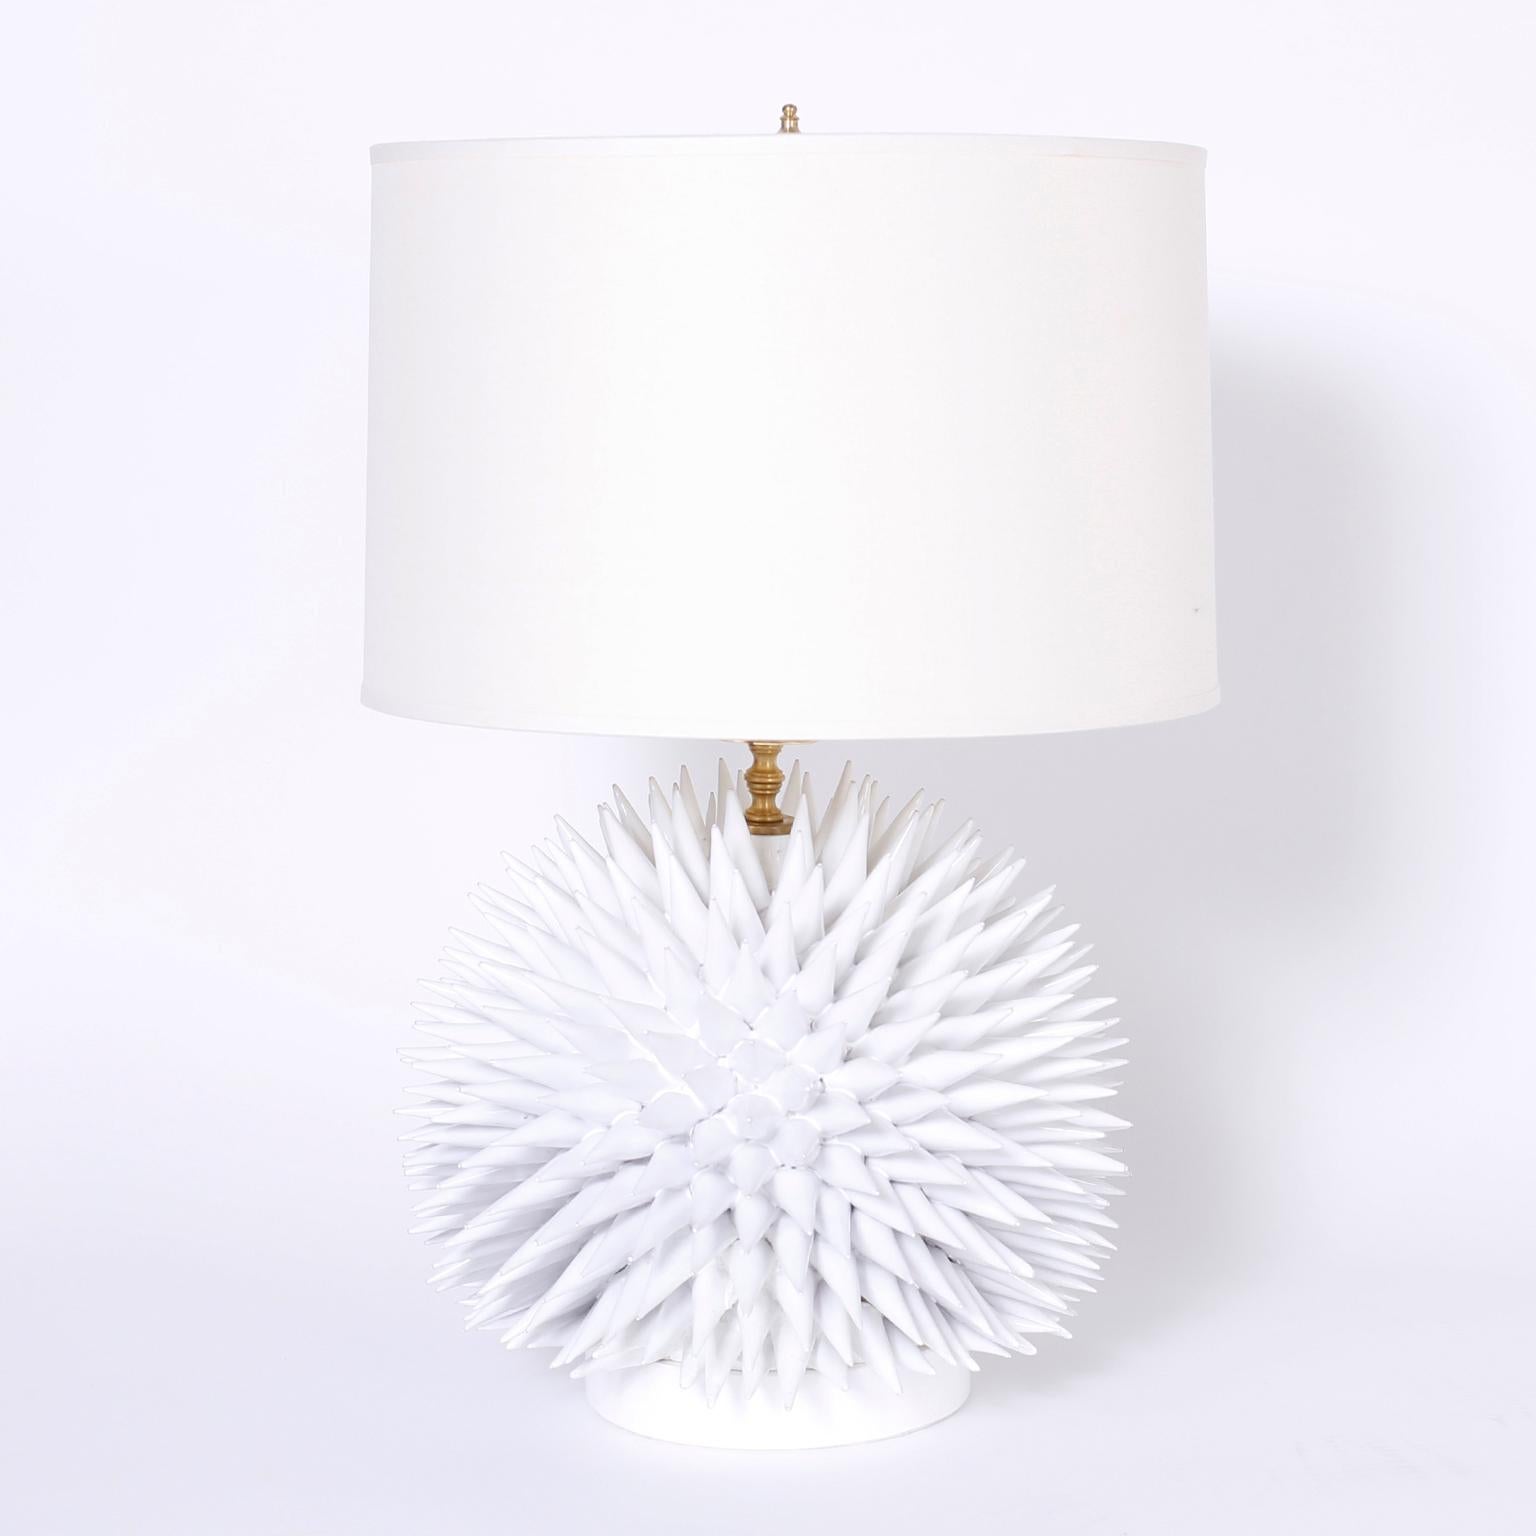 Dramatic pair of table lamps crafted in terracotta, glazed white, and having an elaborate composition resembling a sea urchin.